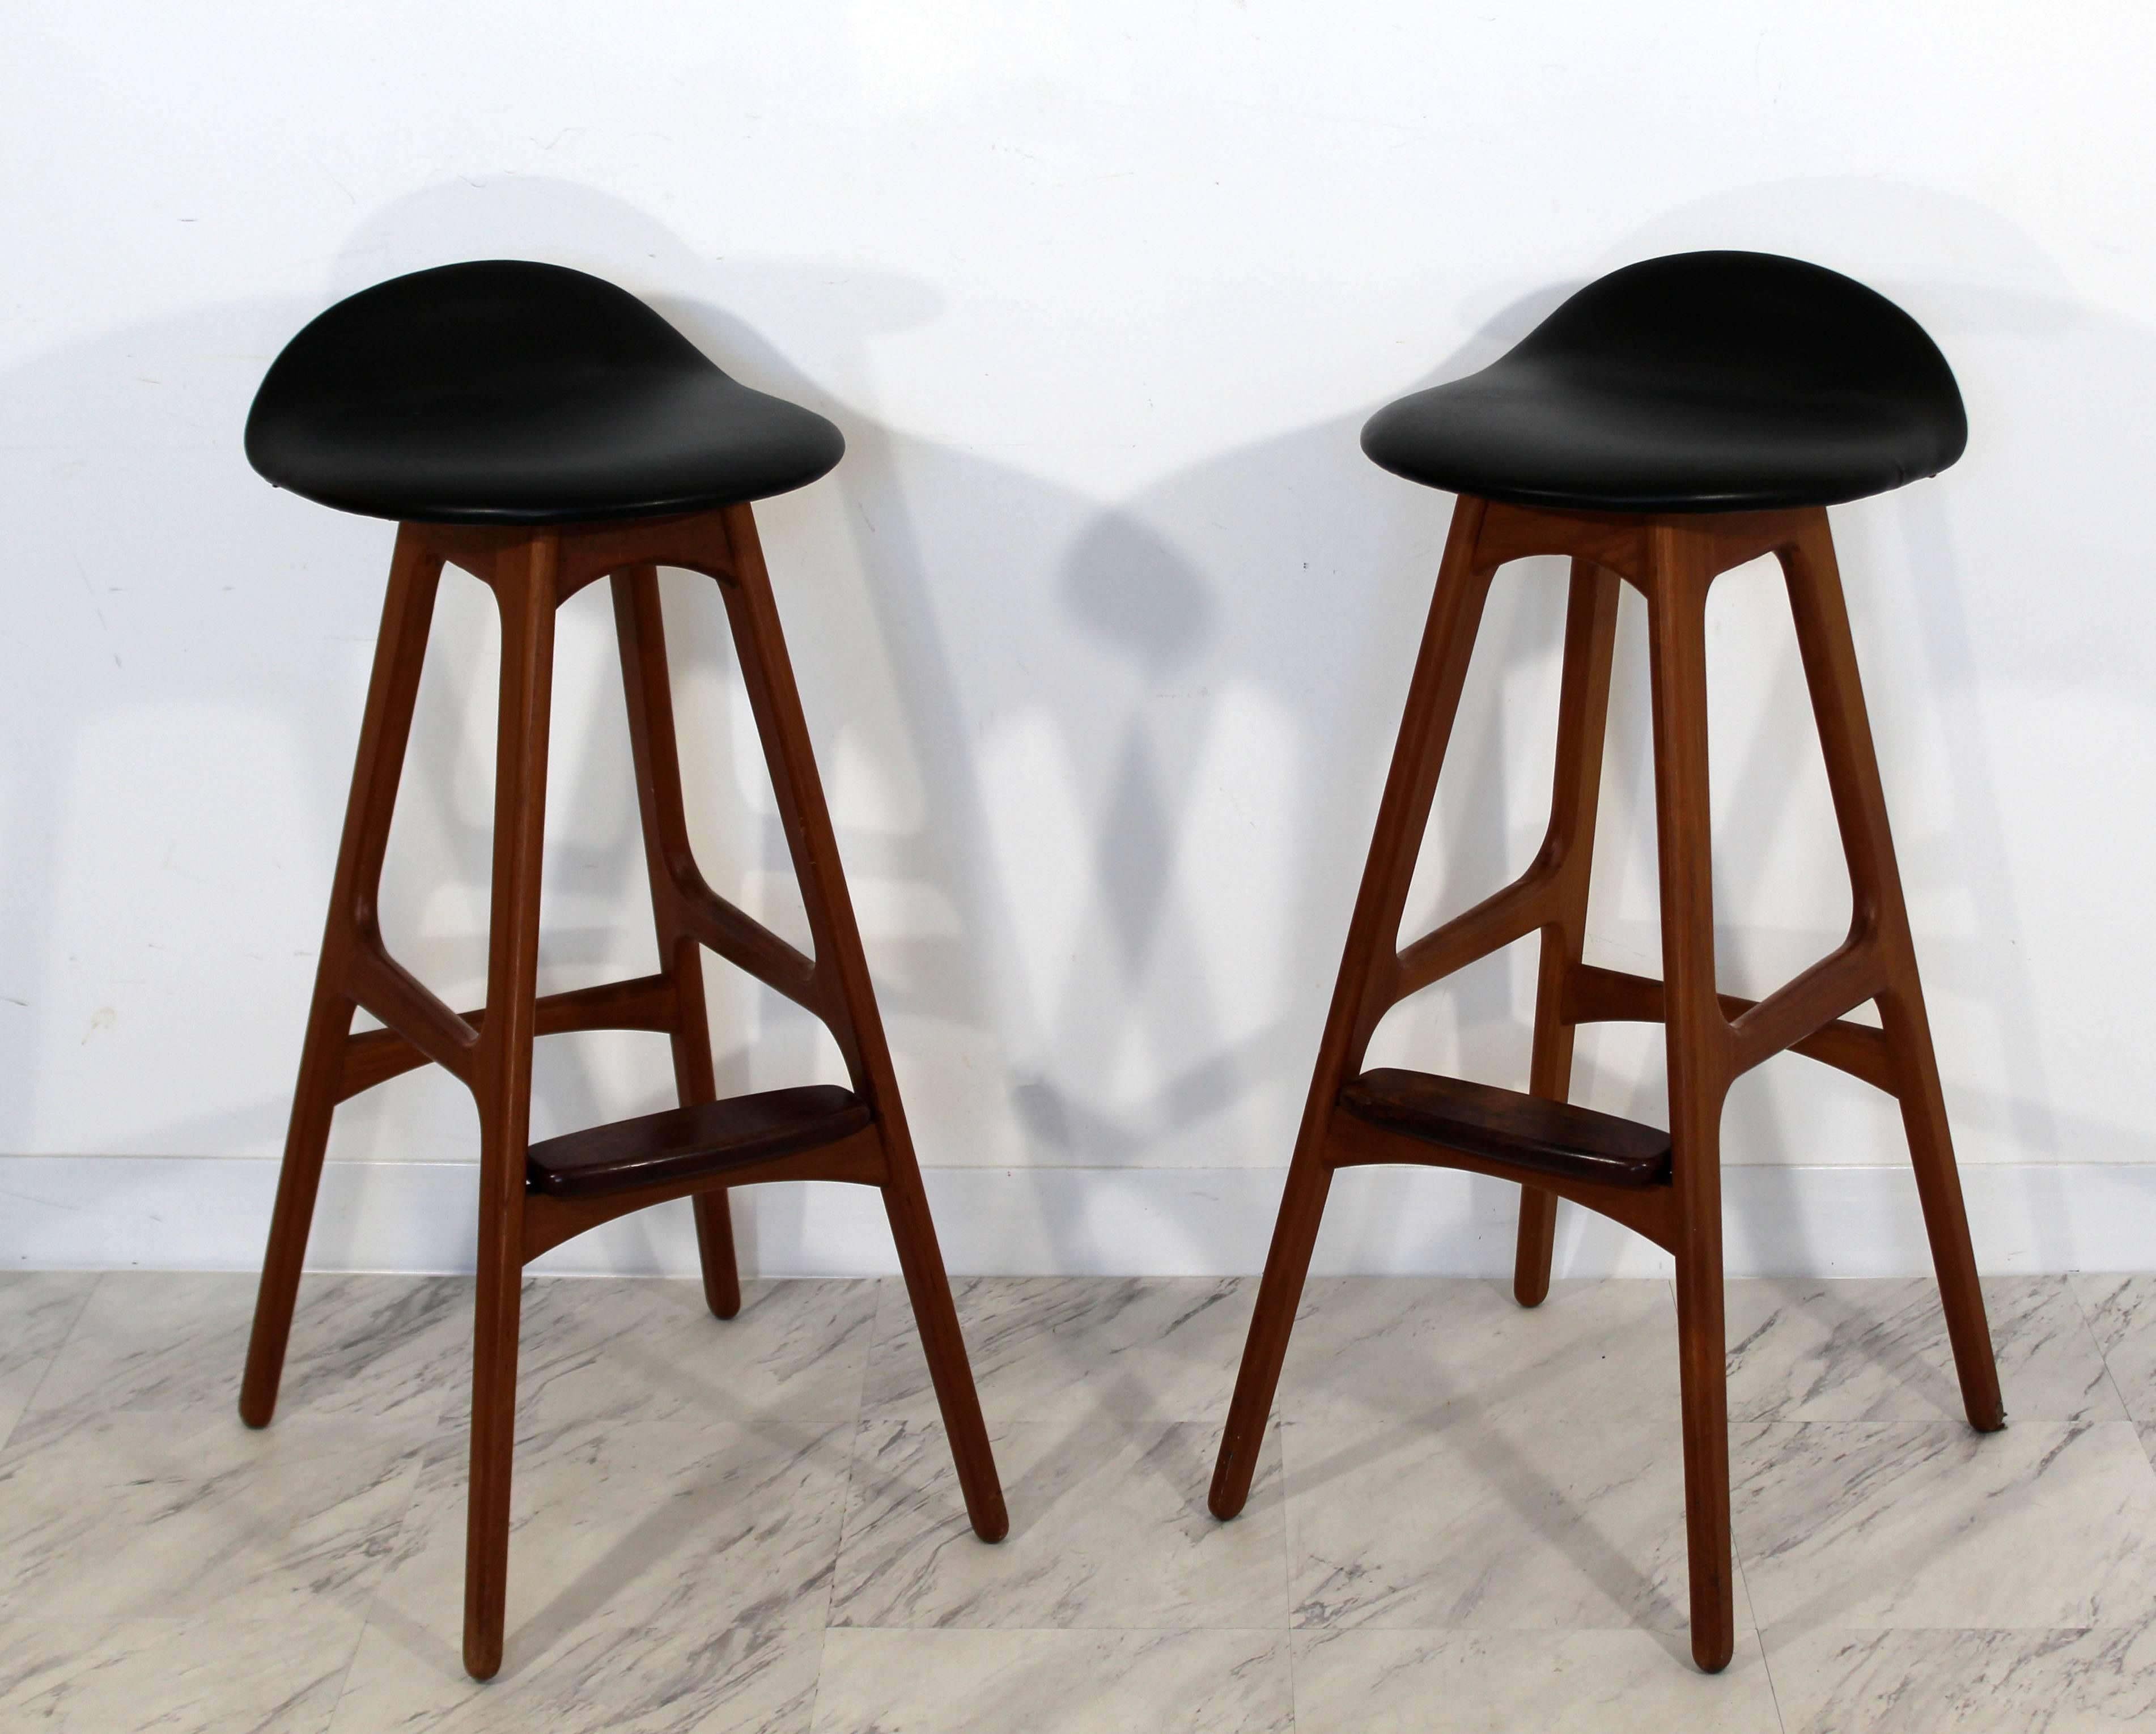 For your consideration is an incredible pair of bar stools, made of rosewood and upholstered in black leather, by Erik Buck, Denmark, circa 1960s. In excellent condition. The dimensions are 15